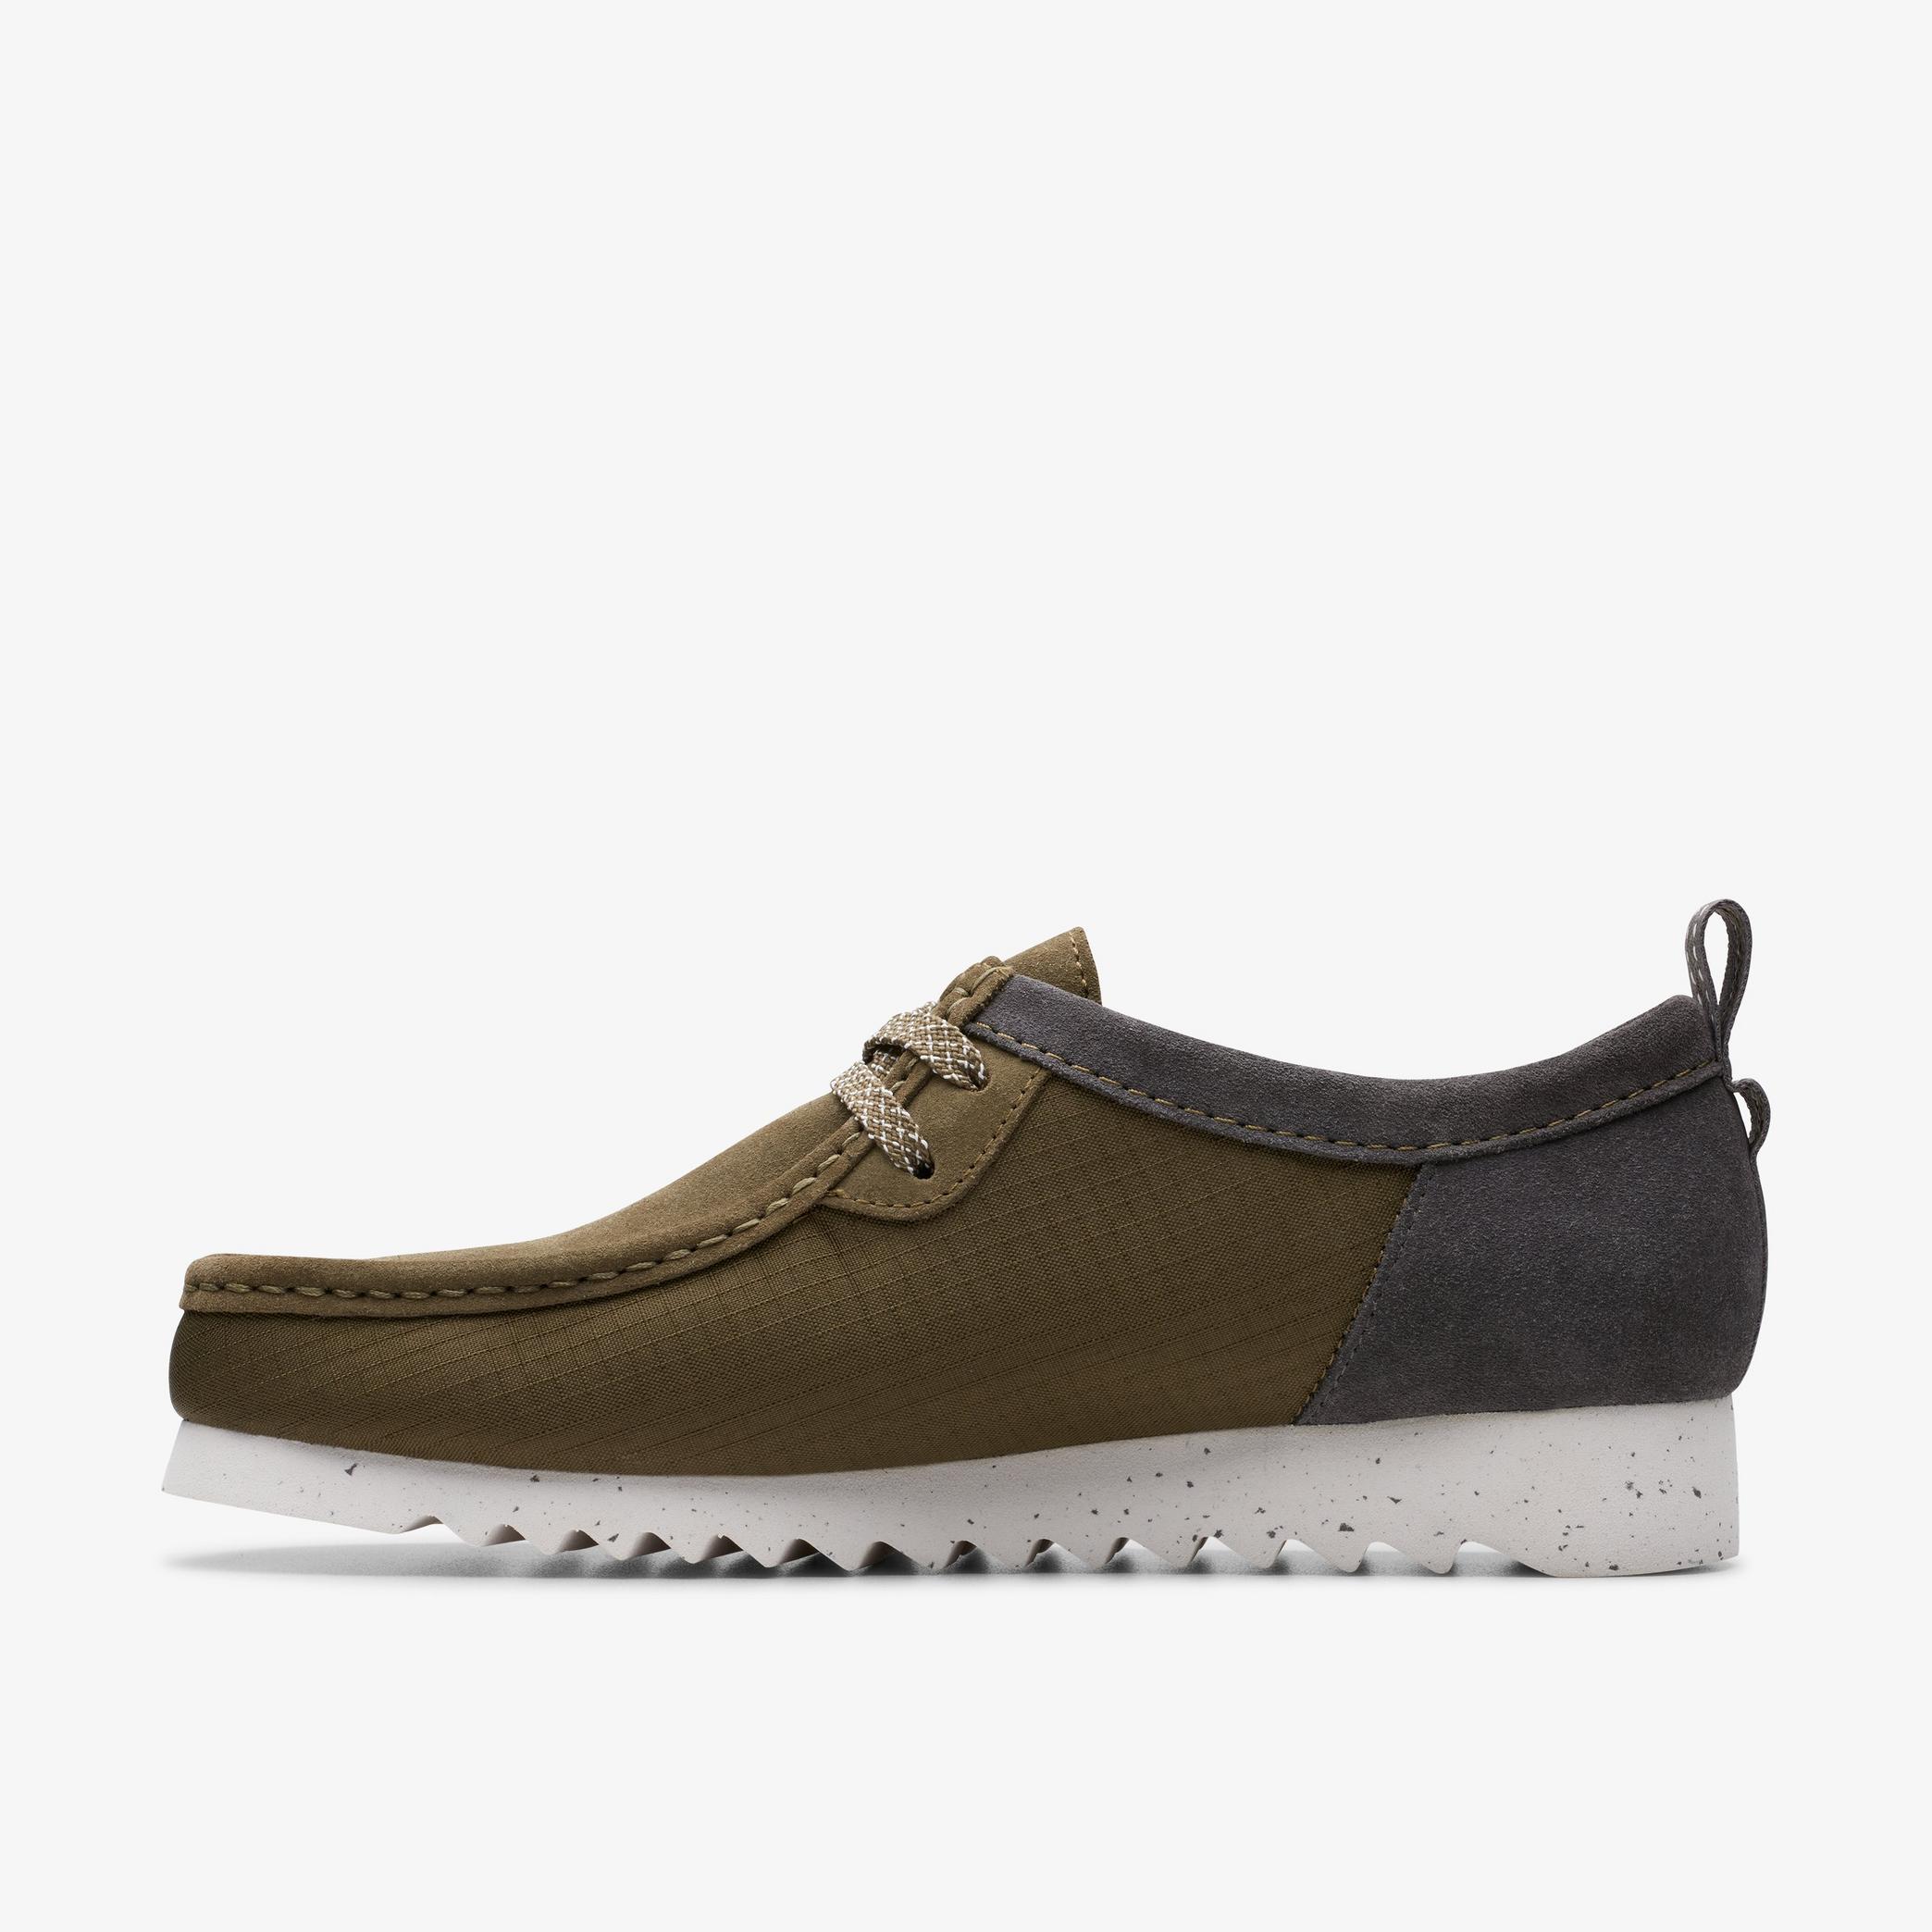 Wallabee FTRE Lo Olive Combination Moccasins, view 2 of 6